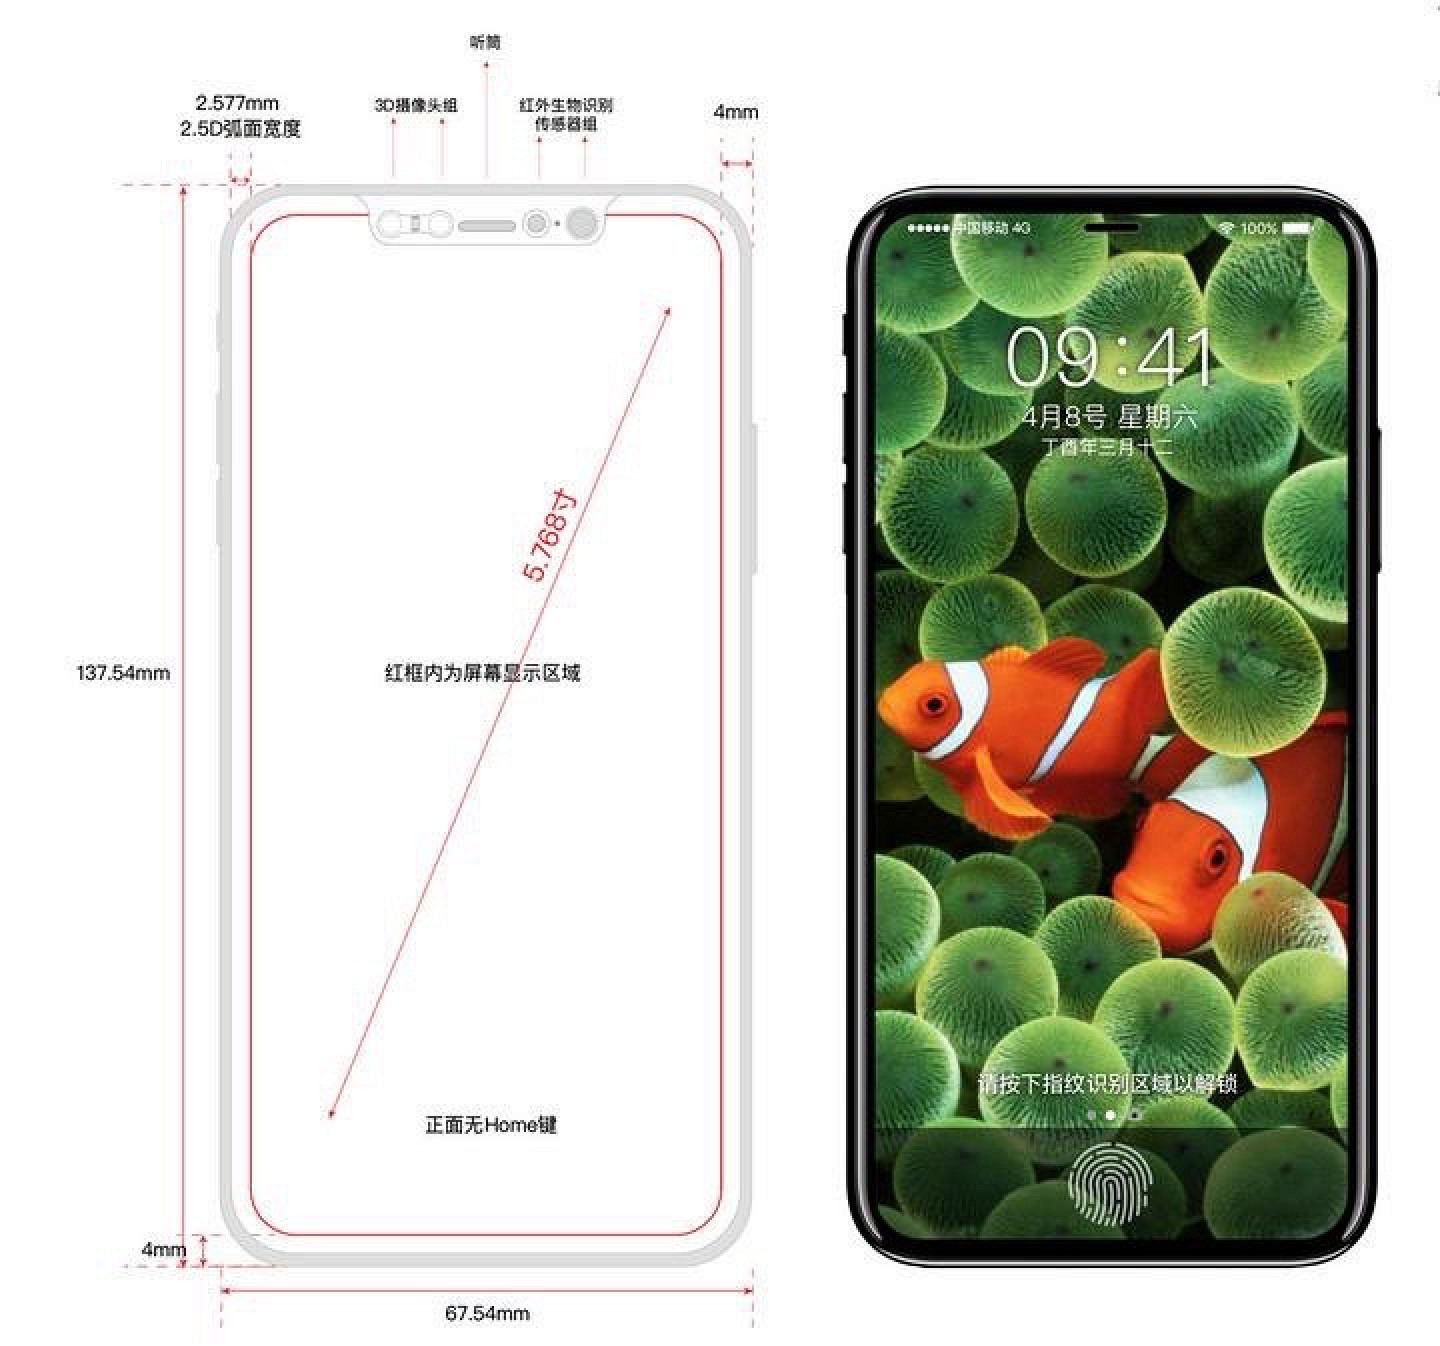 iPhone 8 dimensions